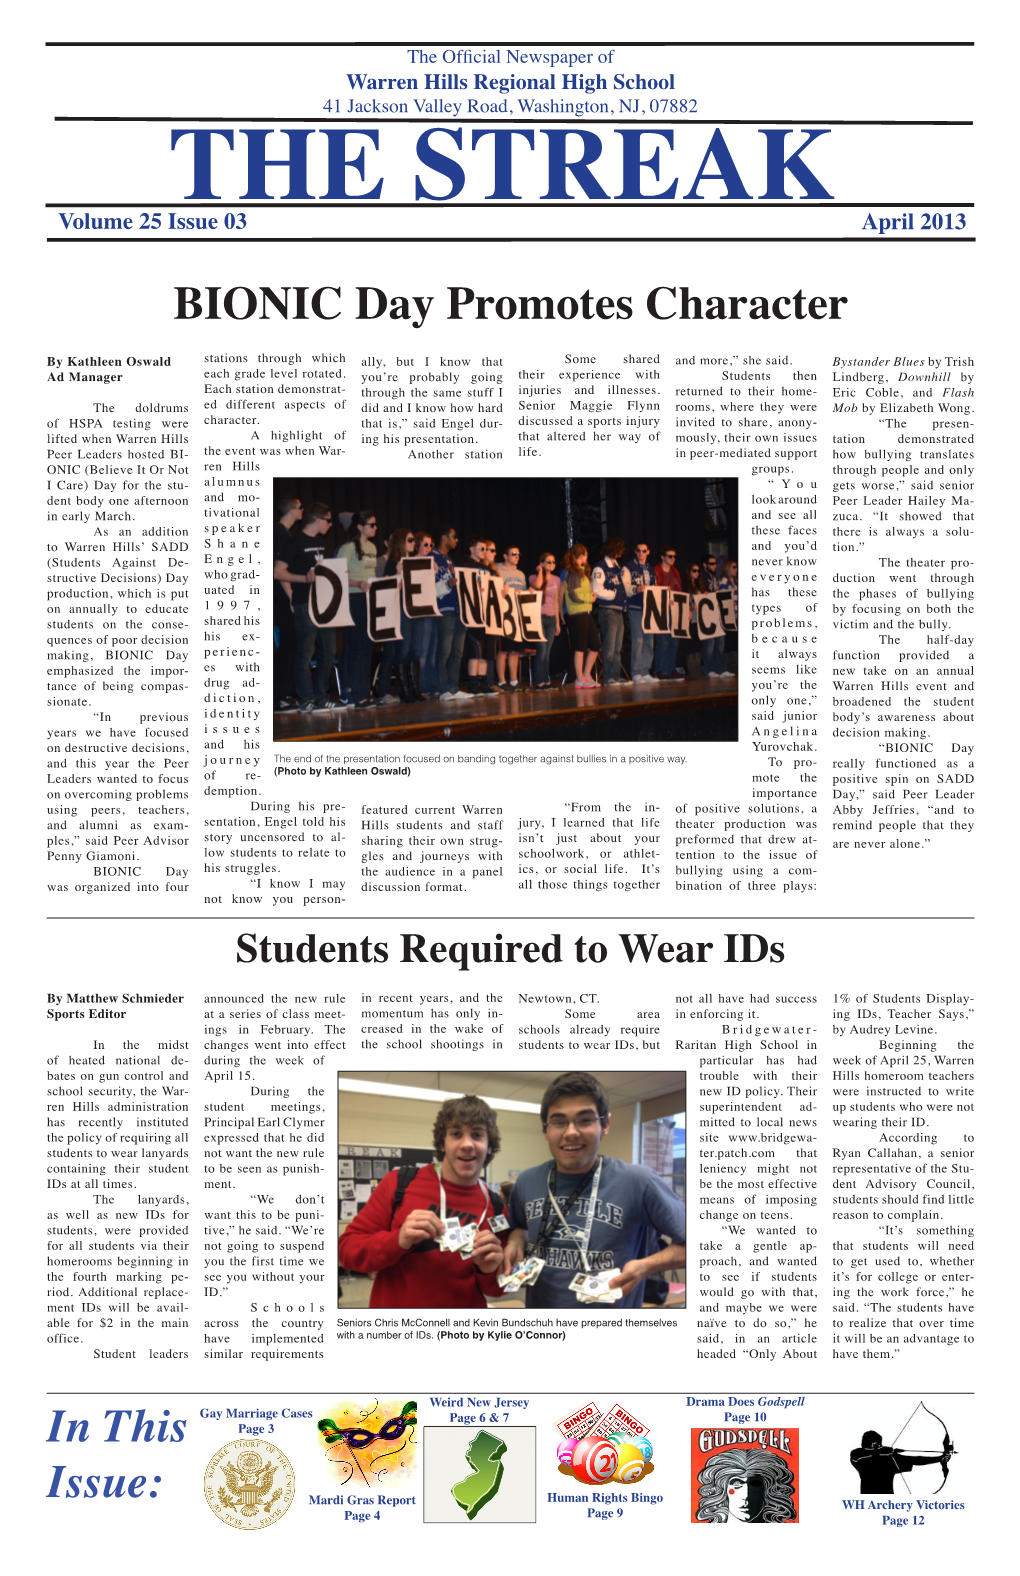 In This Issue: BIONIC Day Promotes Character